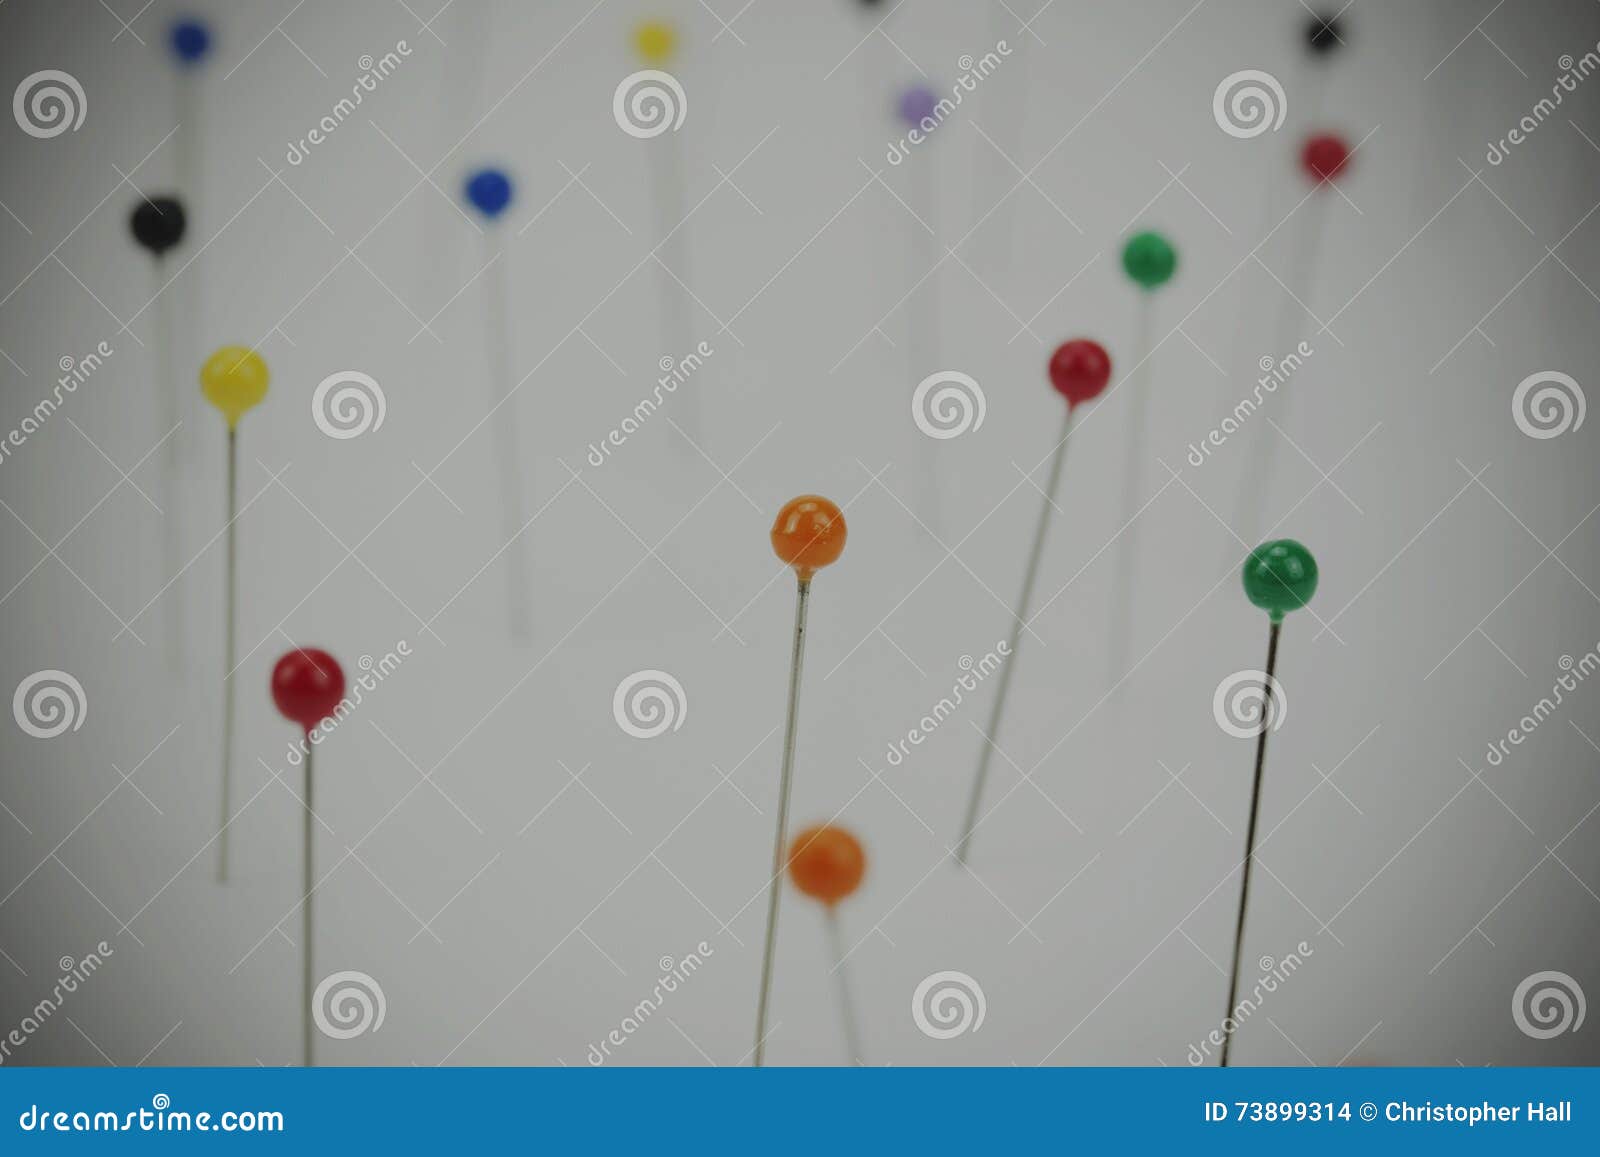 Different Coloured Pins on a Light Background Stock Photo - Image of ...